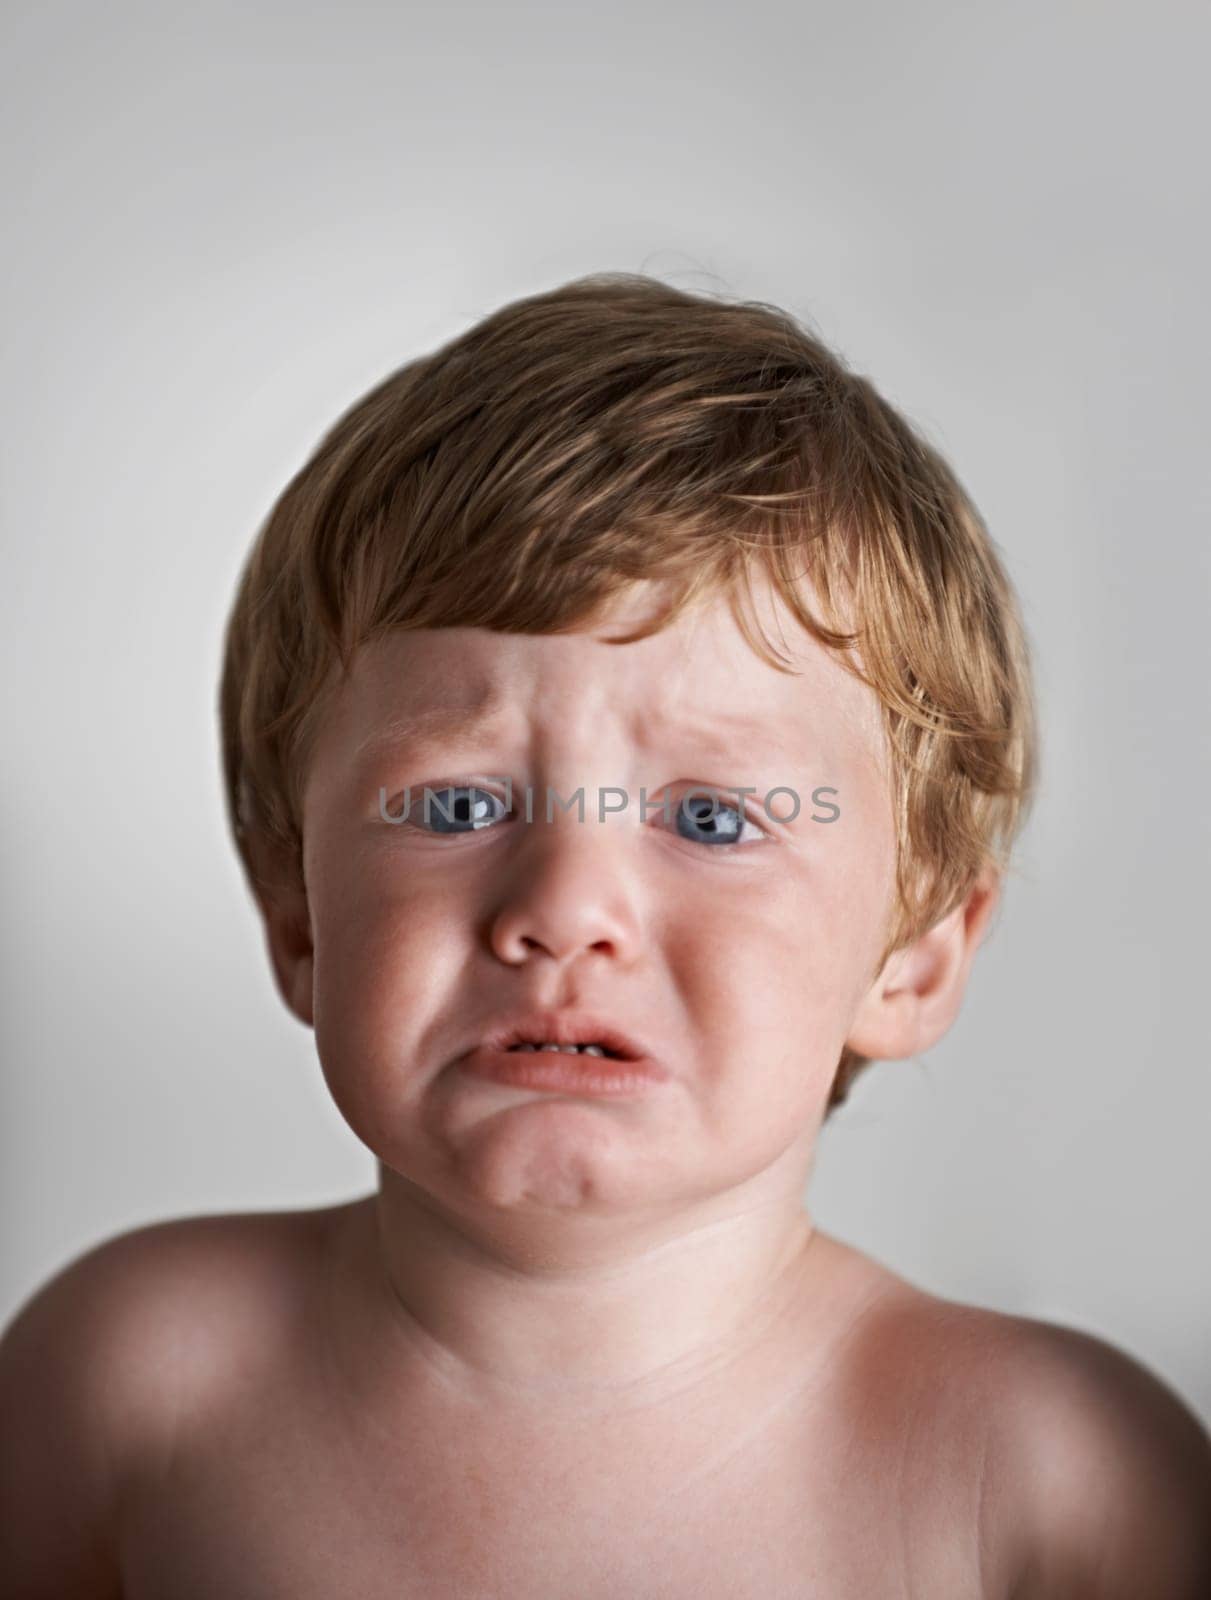 Sad toddler, anxiety and portrait of baby in his home with emotional problem or loss in childhood. Crying, trouble and house with a frustrated young male kid, infant or boy with tears, fear or crisis.